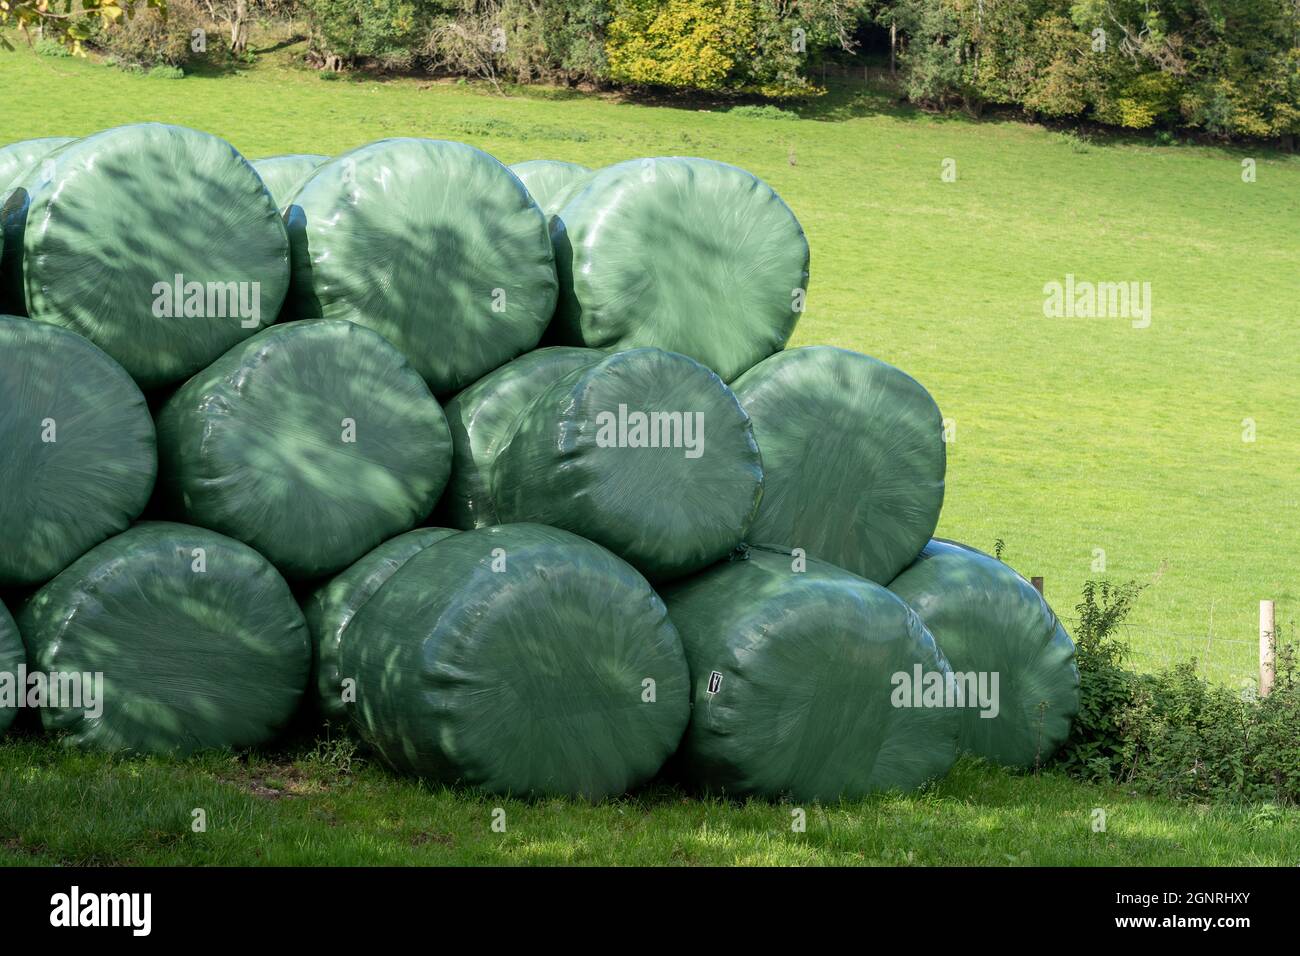 Farmers stored bales of polythene wrapped silage grass for animal livestock feed Stock Photo